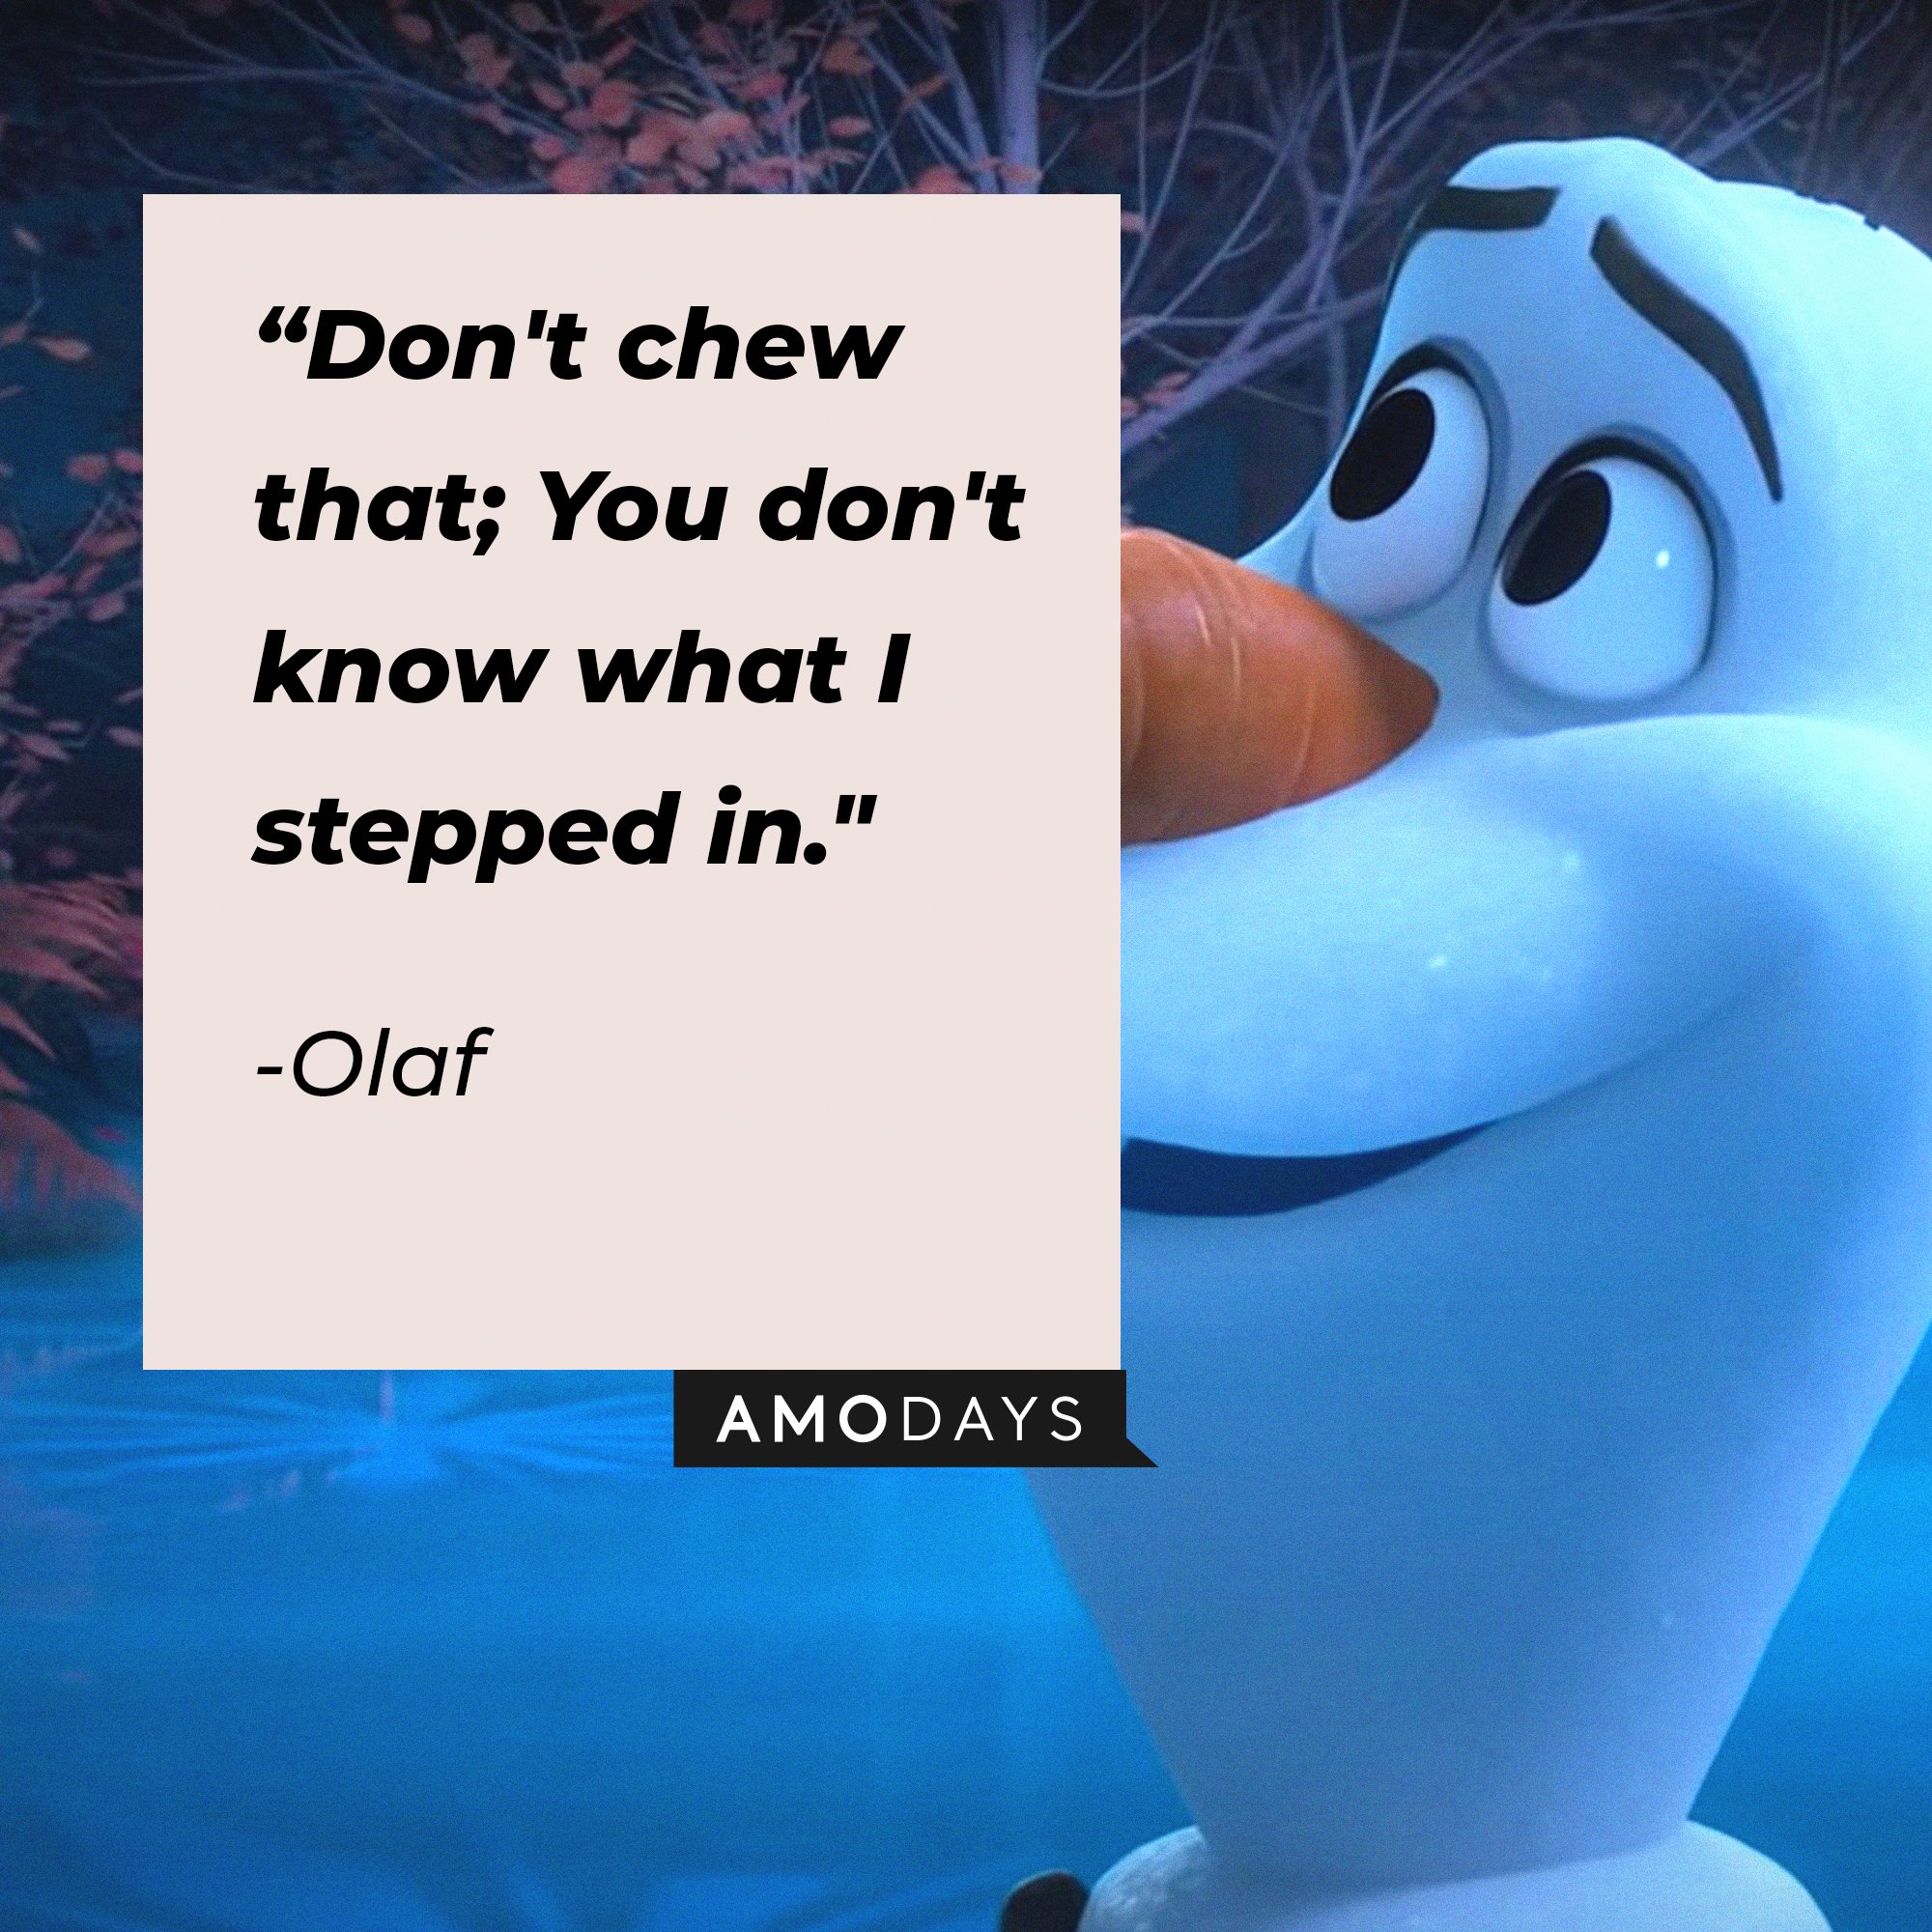 Olaf’s quote: “Don't chew that; You don't know what I stepped in." | Image: AmoDays